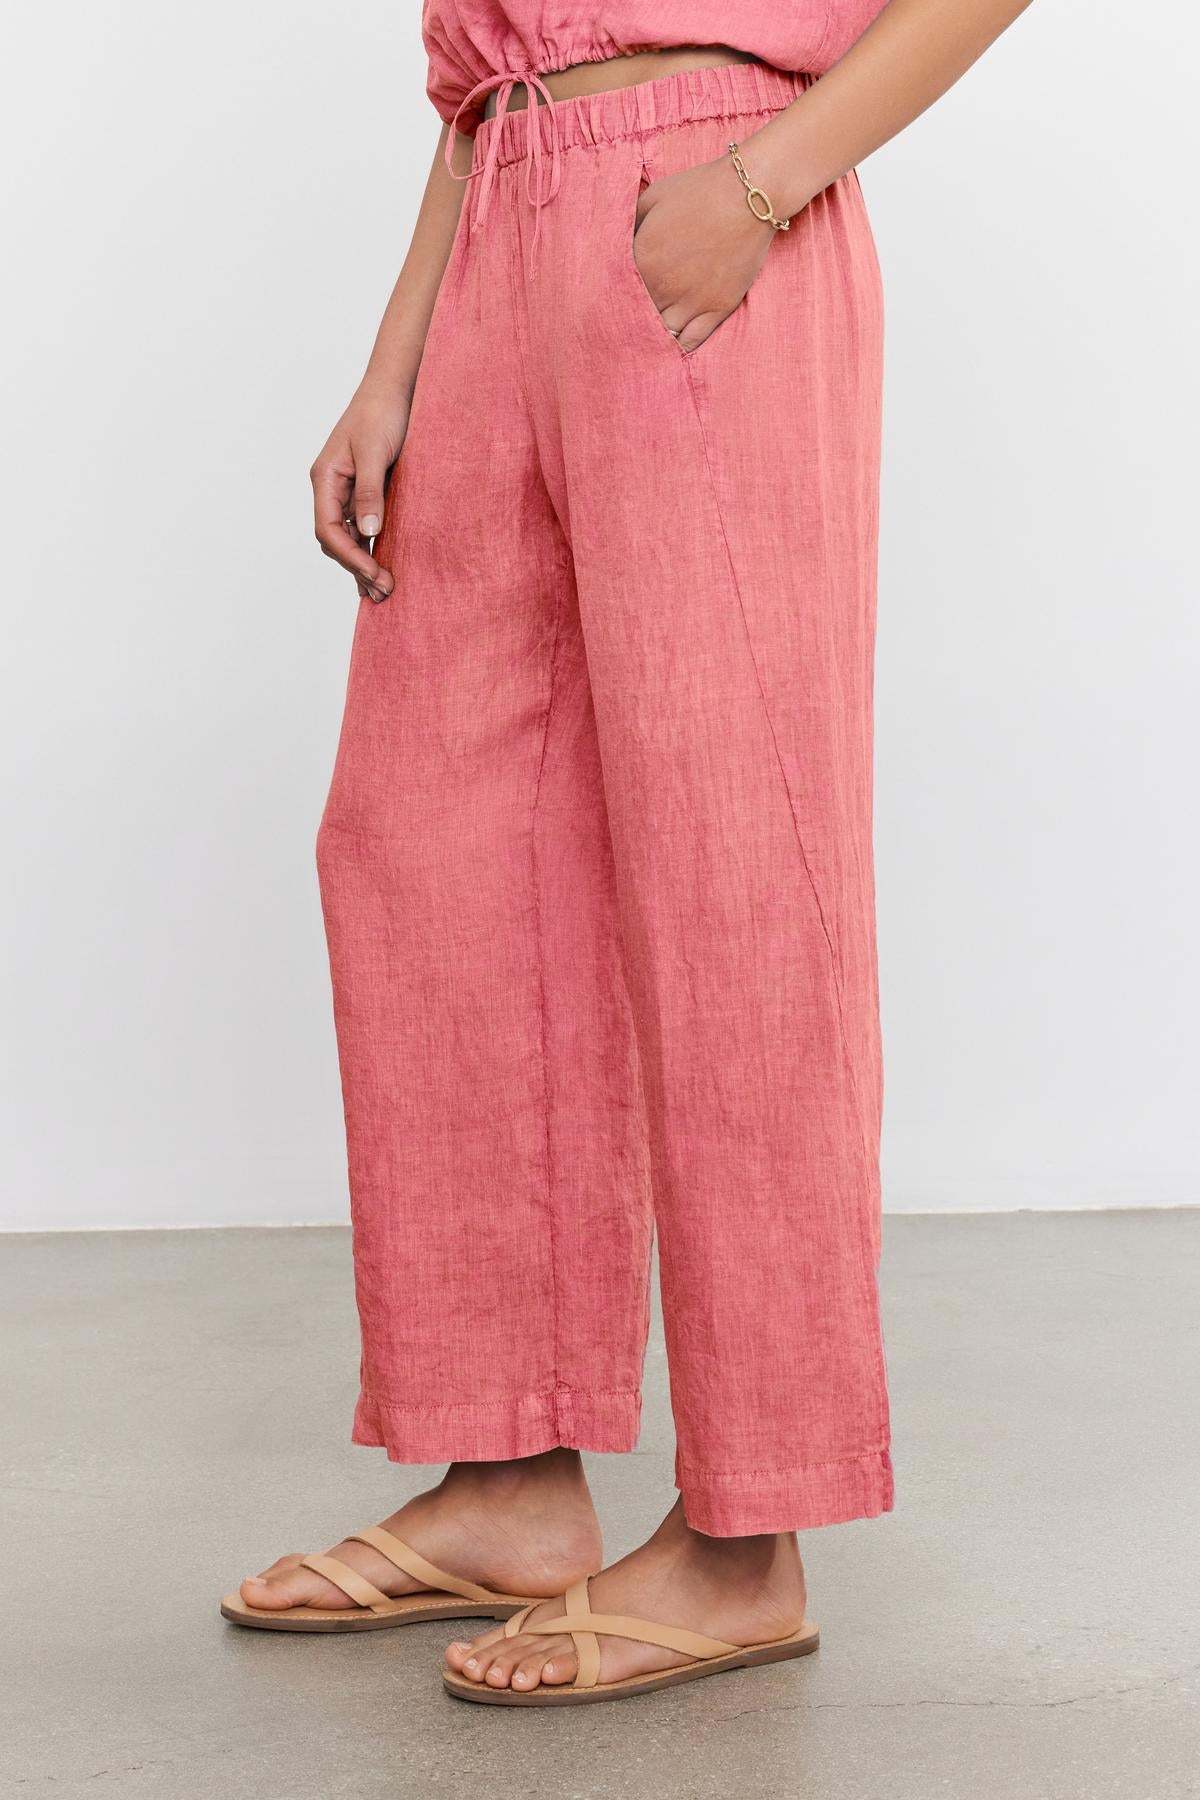   A person is wearing loose-fitting pink LOLA LINEN PANT by Velvet by Graham & Spencer with hands in pockets, a matching top, and beige sandals. 